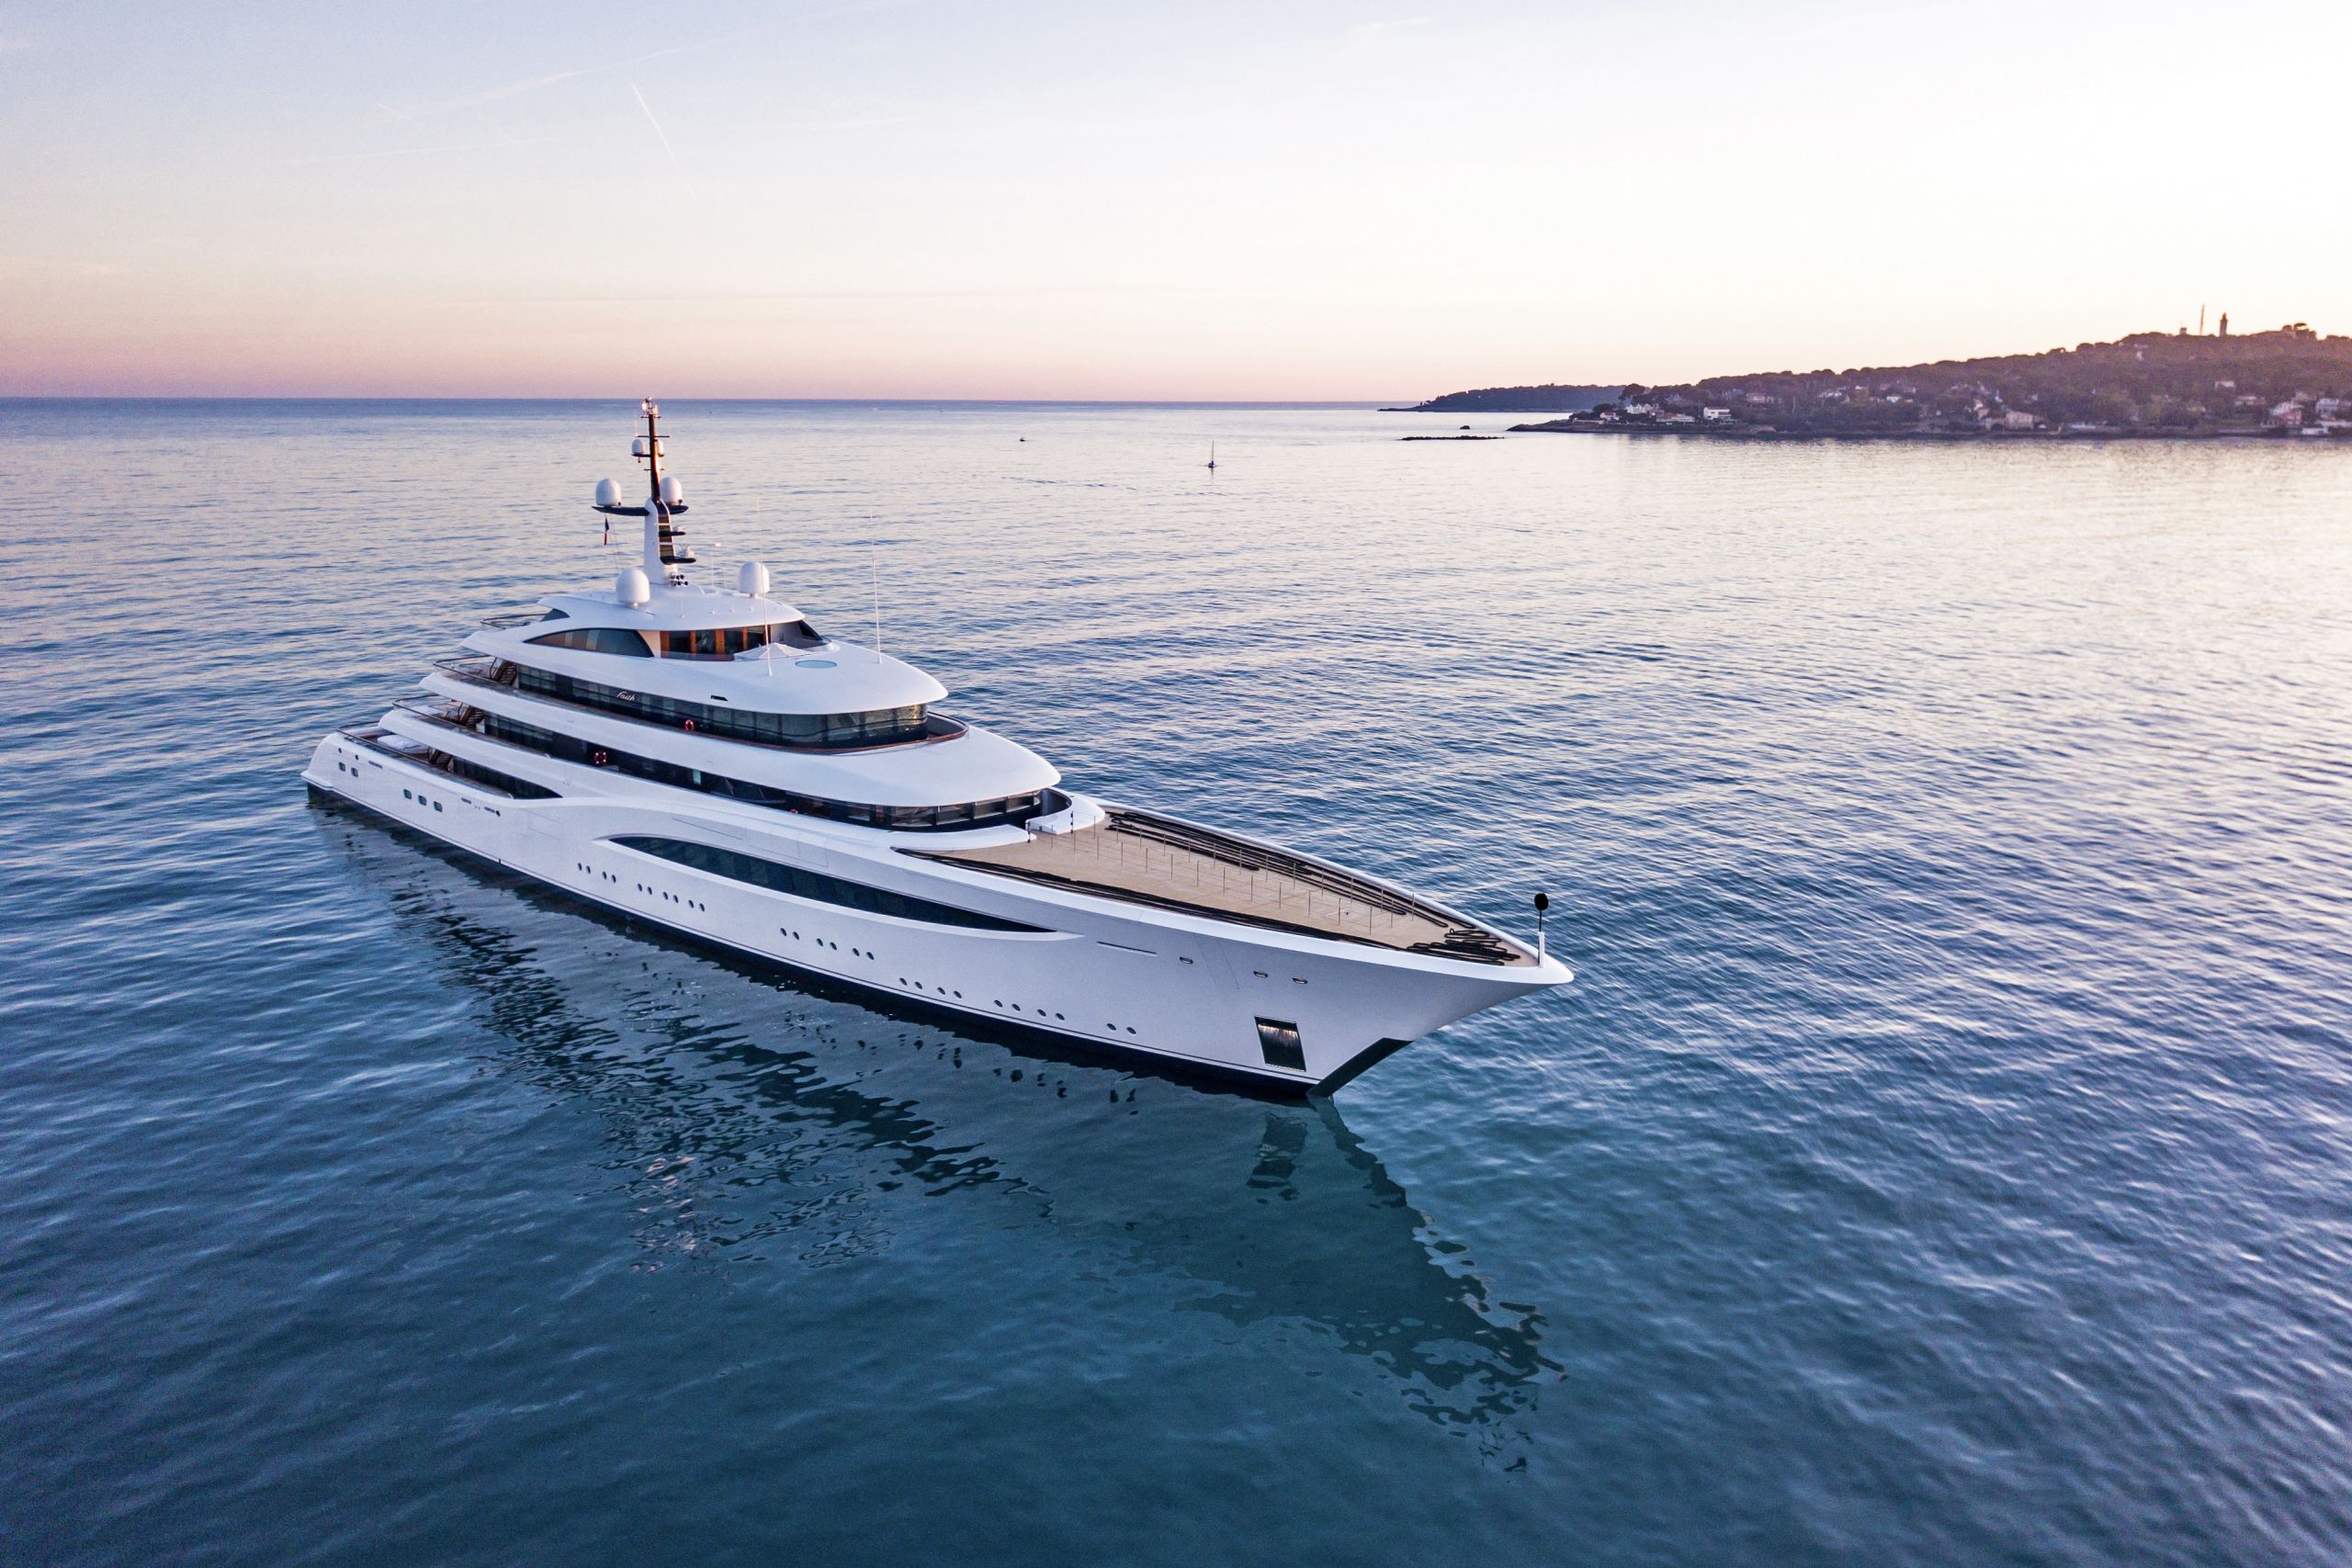 Top 25 yachts owned by billionaires in 2016 - Yacht Harbour